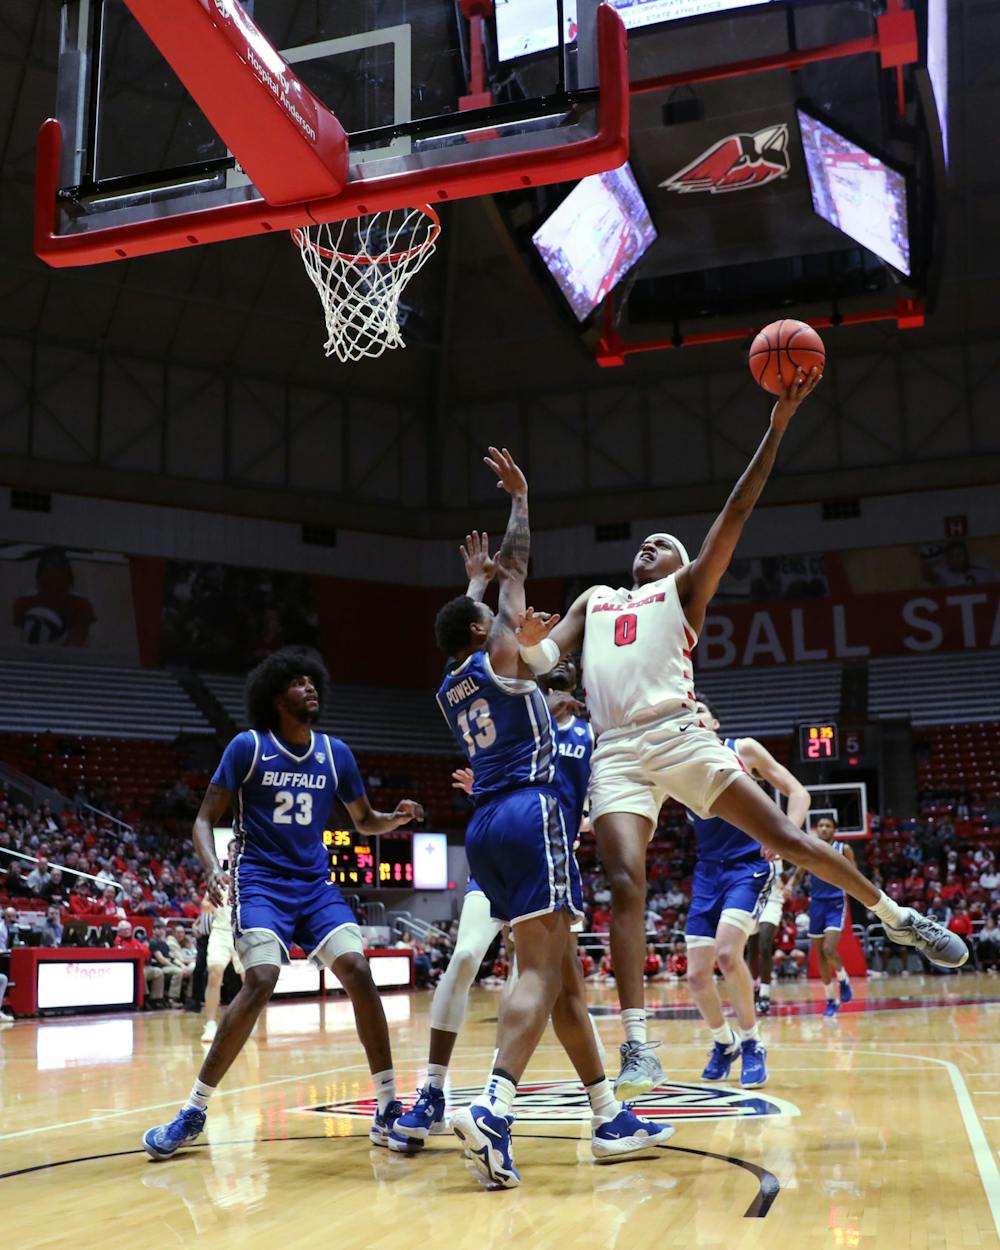 Redshirt junior guard Jarron Coleman goes for a basket in a game against Buffalo Jan. 24 at Worthen Arena. Coleman had four rebounds during the game. Amber Pietz, DN